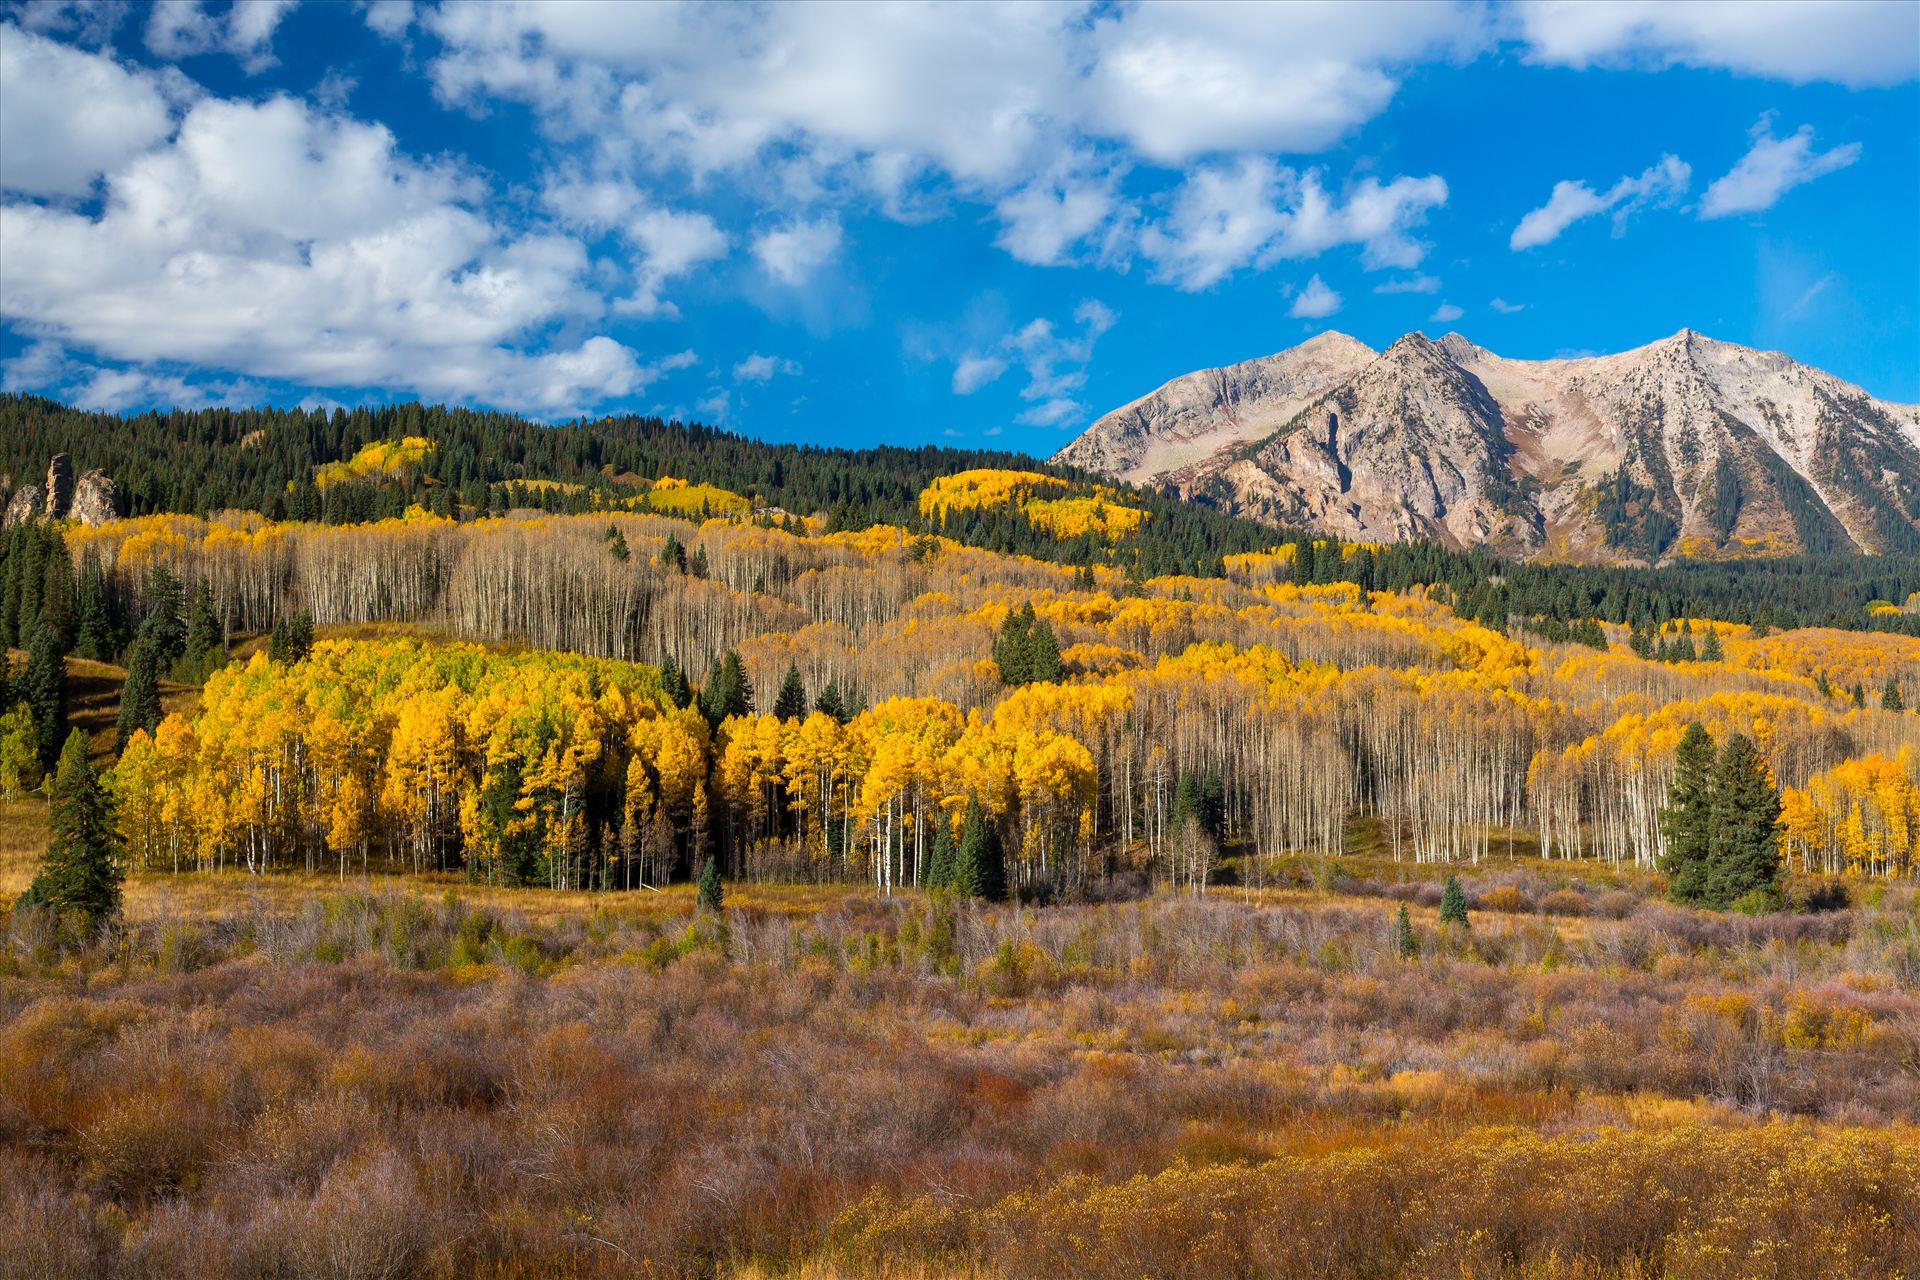 East Beckwith Mountain - East Beckwith mountain surrounded by fall colors. Taken a few steps off Kebler Pass, Crested Butte, Colorado. by Scott Smith Photos